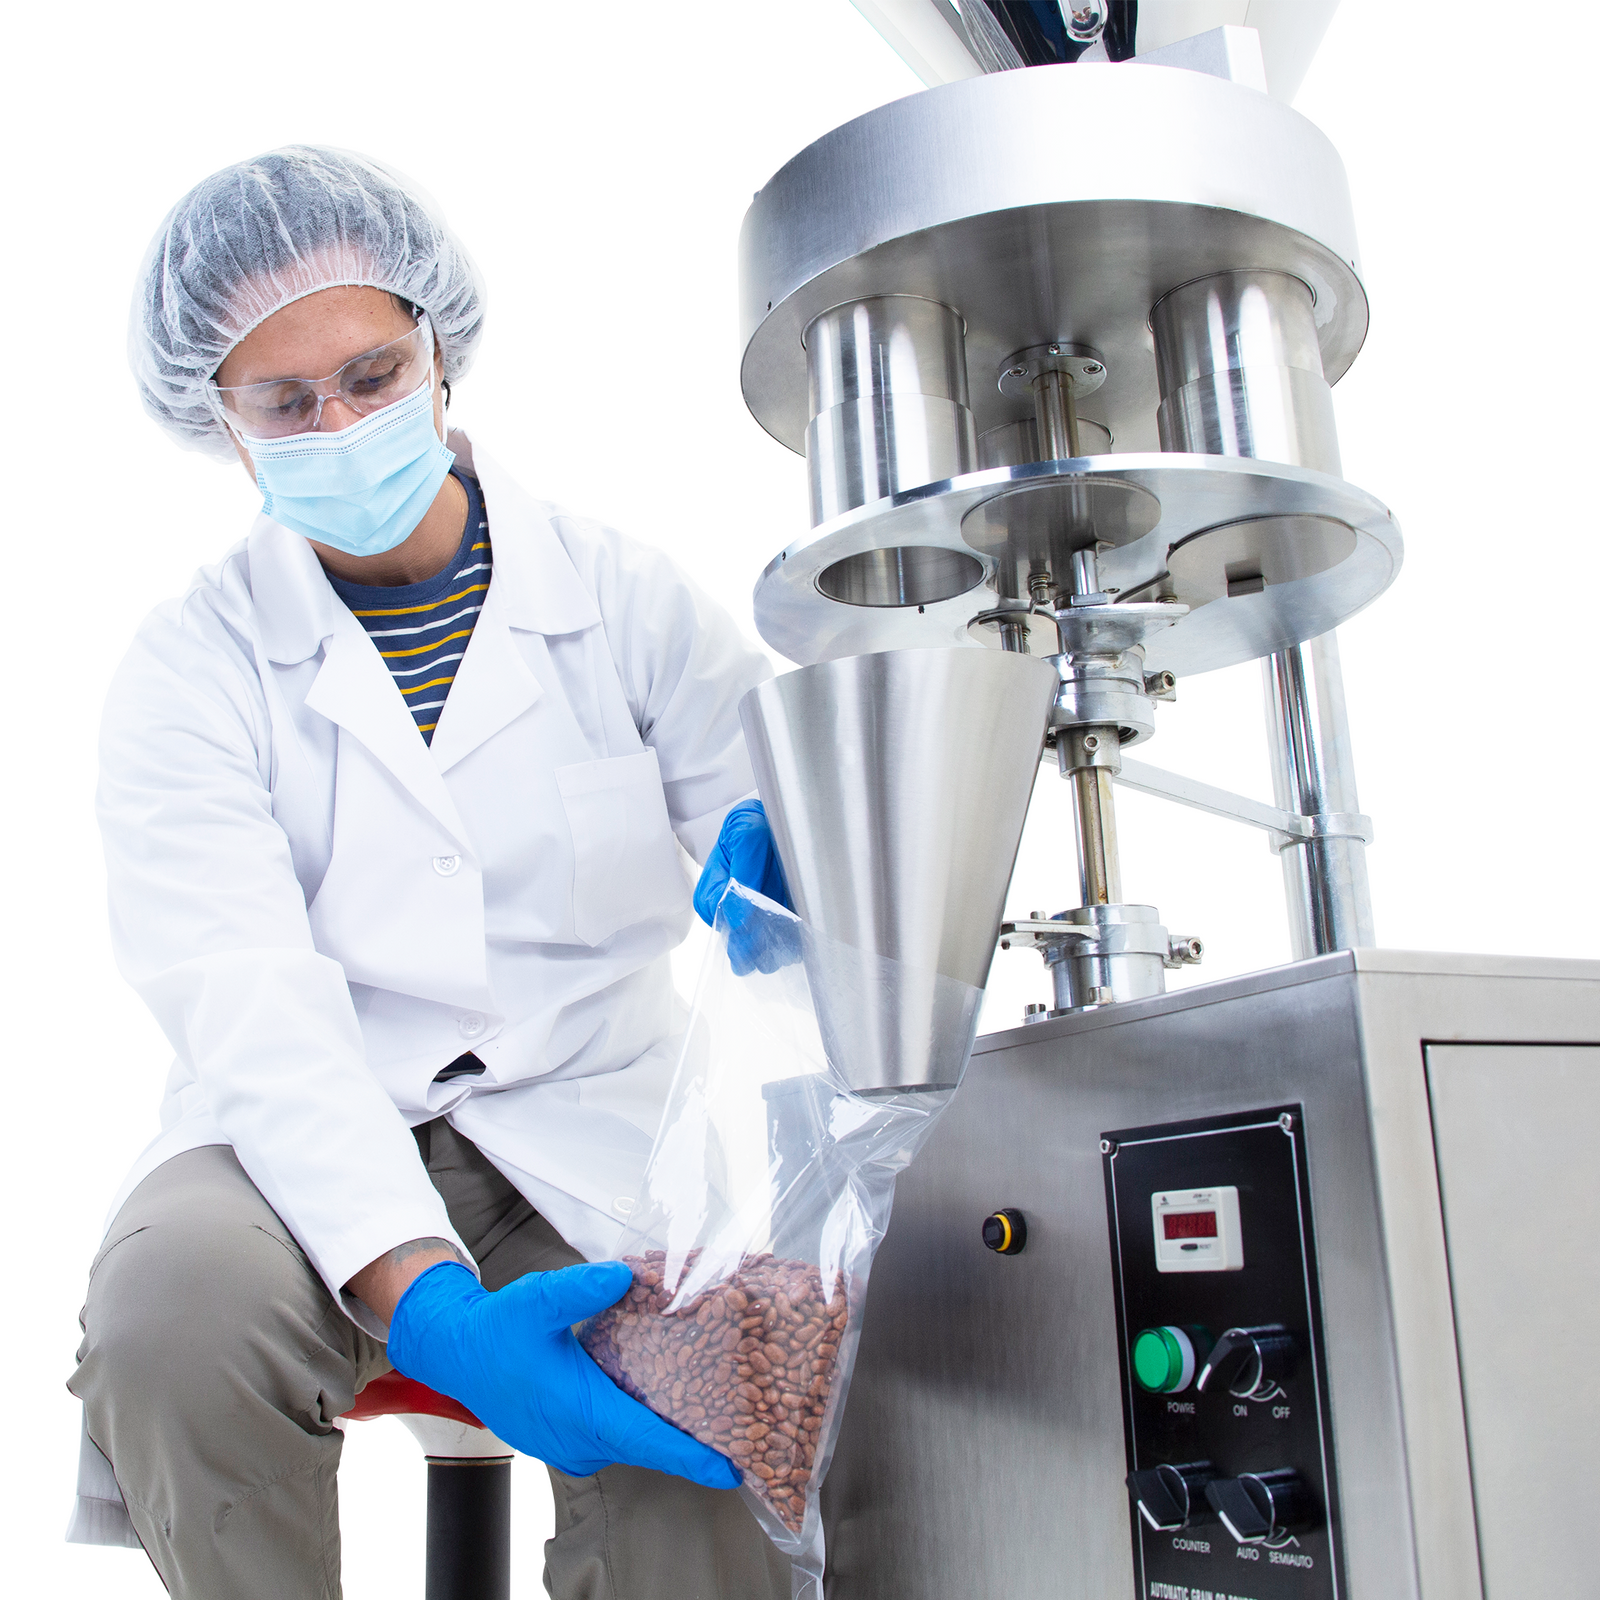 Worker is holding a clear plastic bag under the dispensing cone while the gravity volumetric filler releases granular product with accuracy